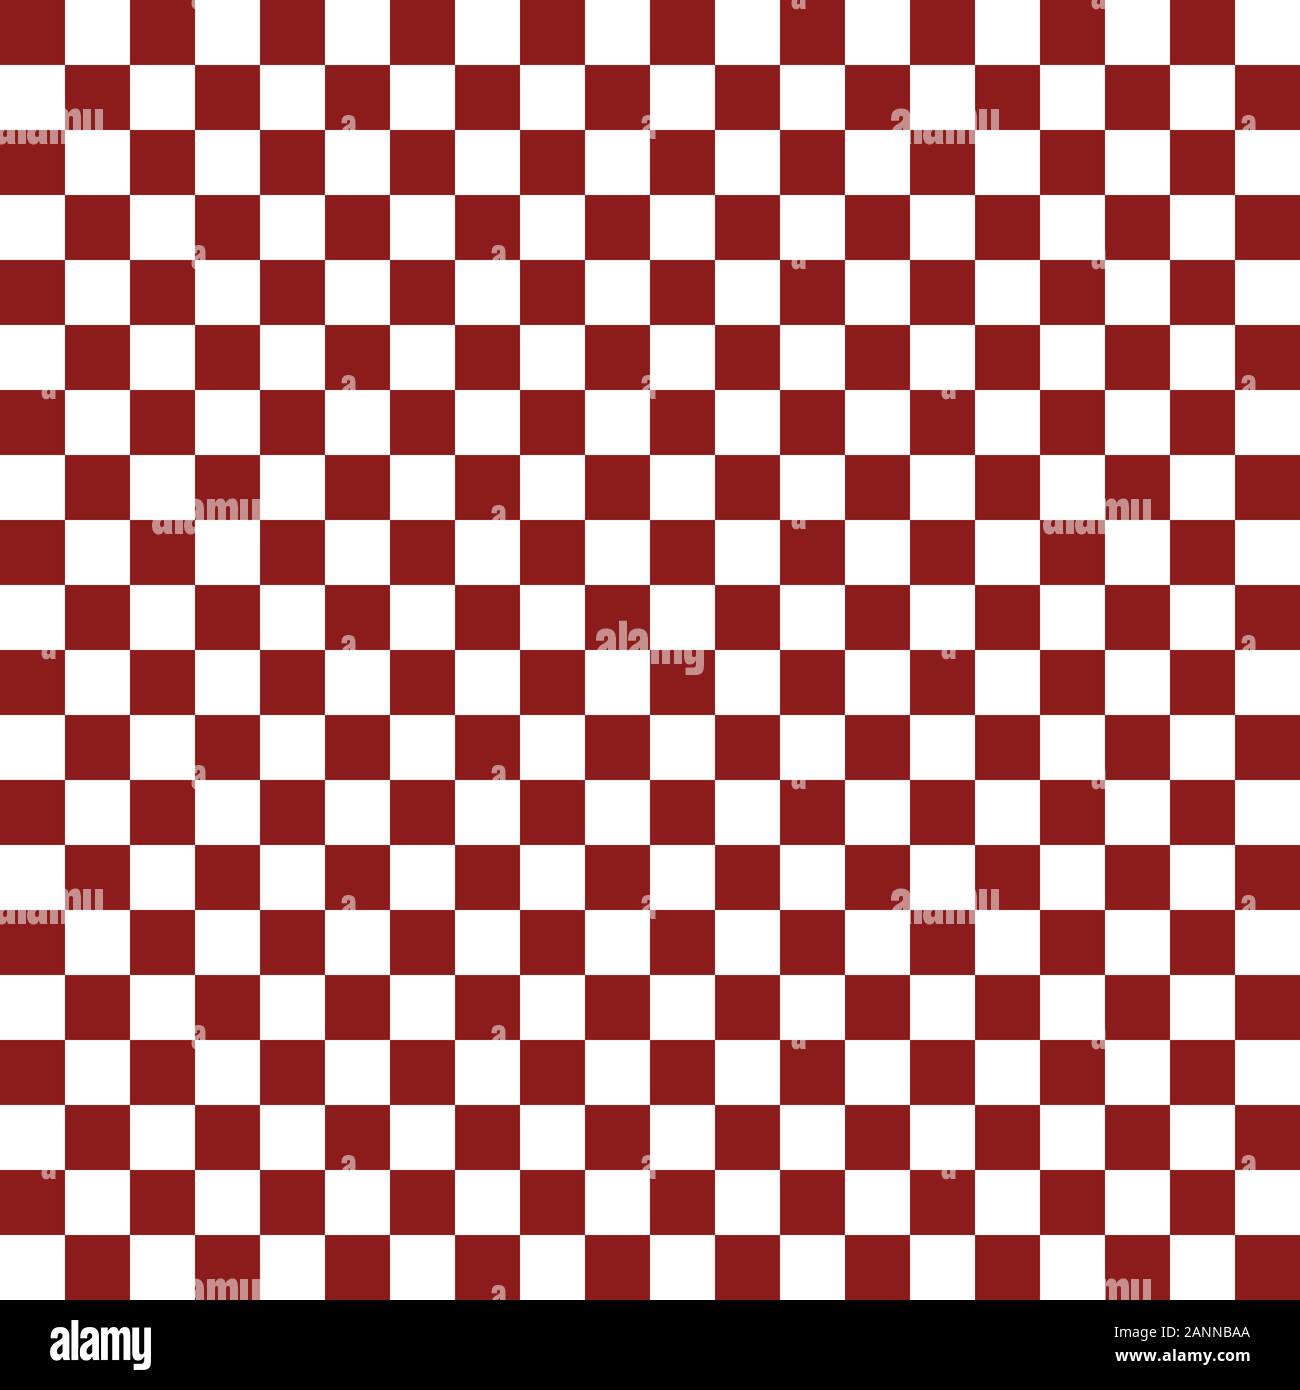 Red and white chess board - vector illustration.. Seamless pattern of red and white squares Stock Vector